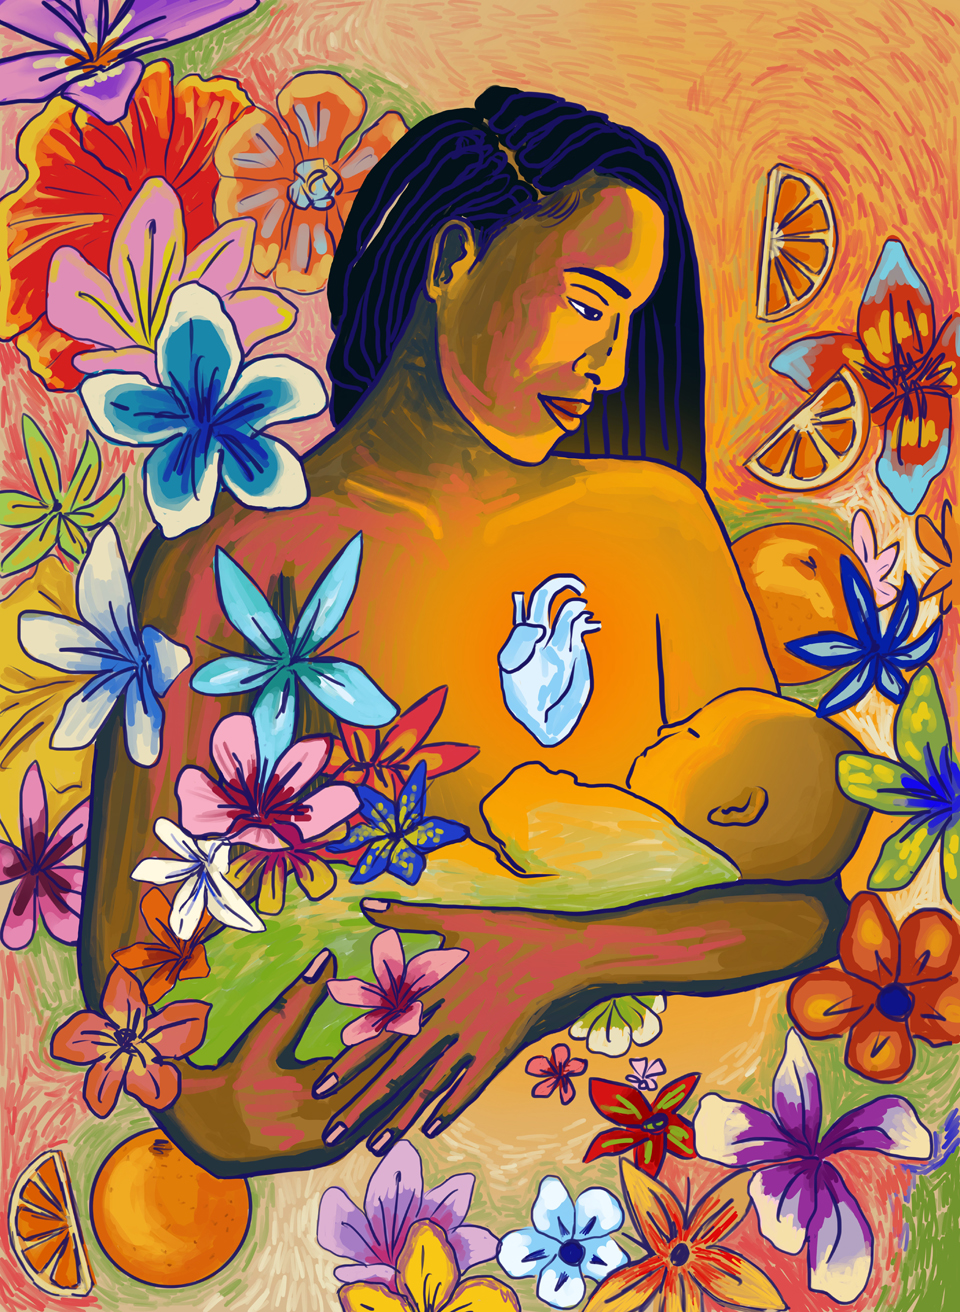 Illustration of woman nursing infant with flowers around them.